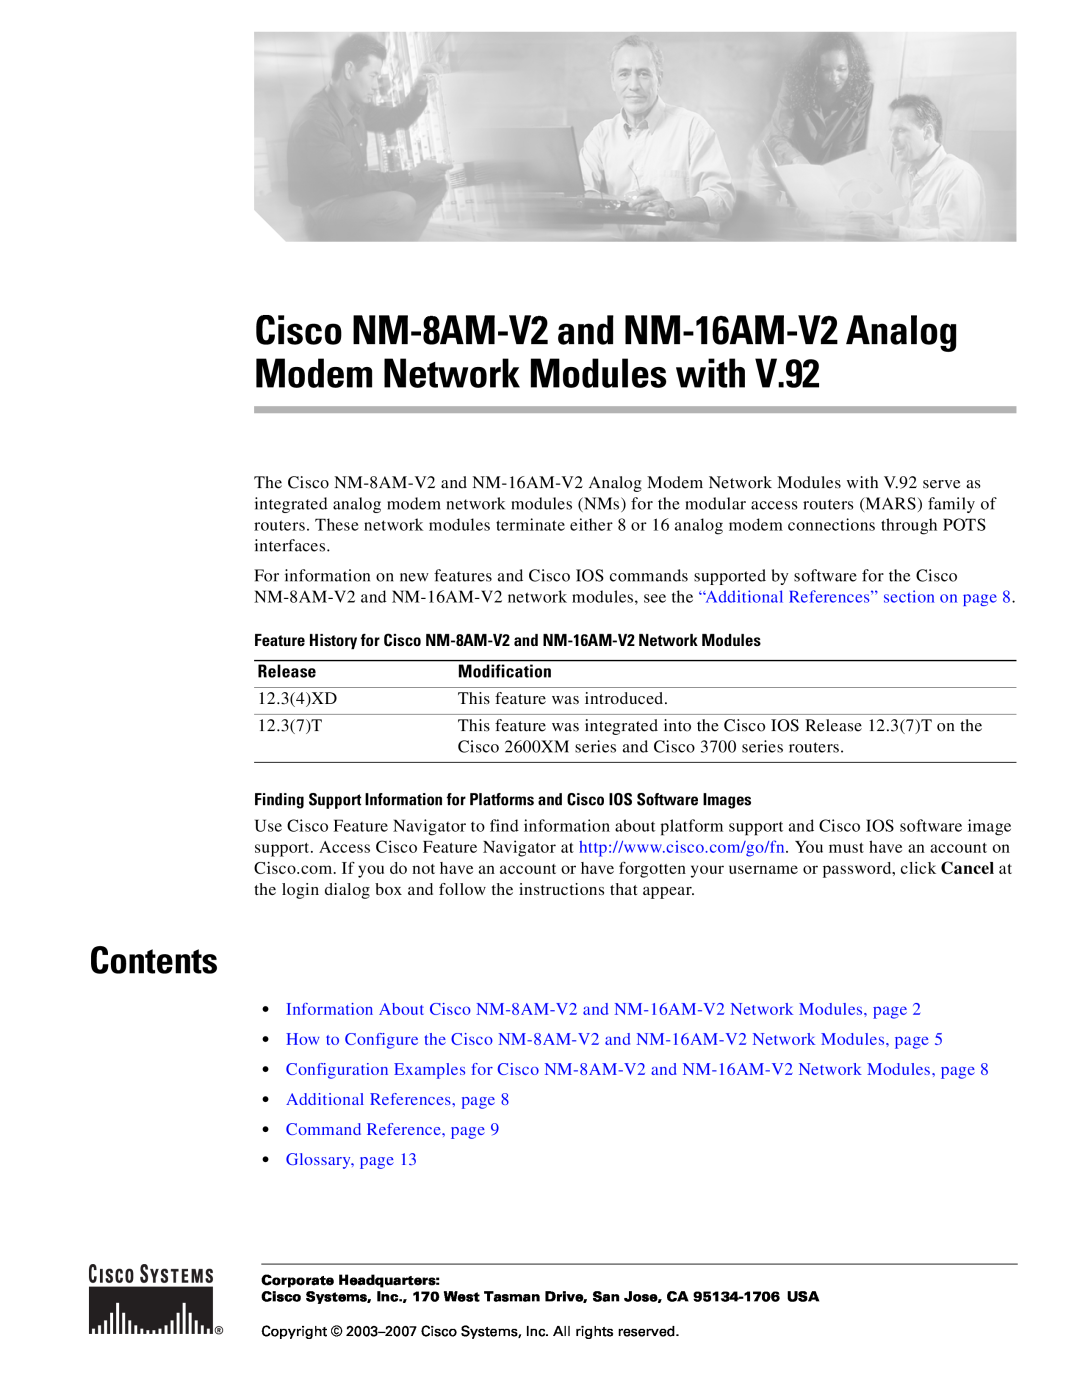 Cisco Systems manual Contents, Feature History for Cisco NM-8AM-V2 and NM-16AM-V2 Network Modules, Release 